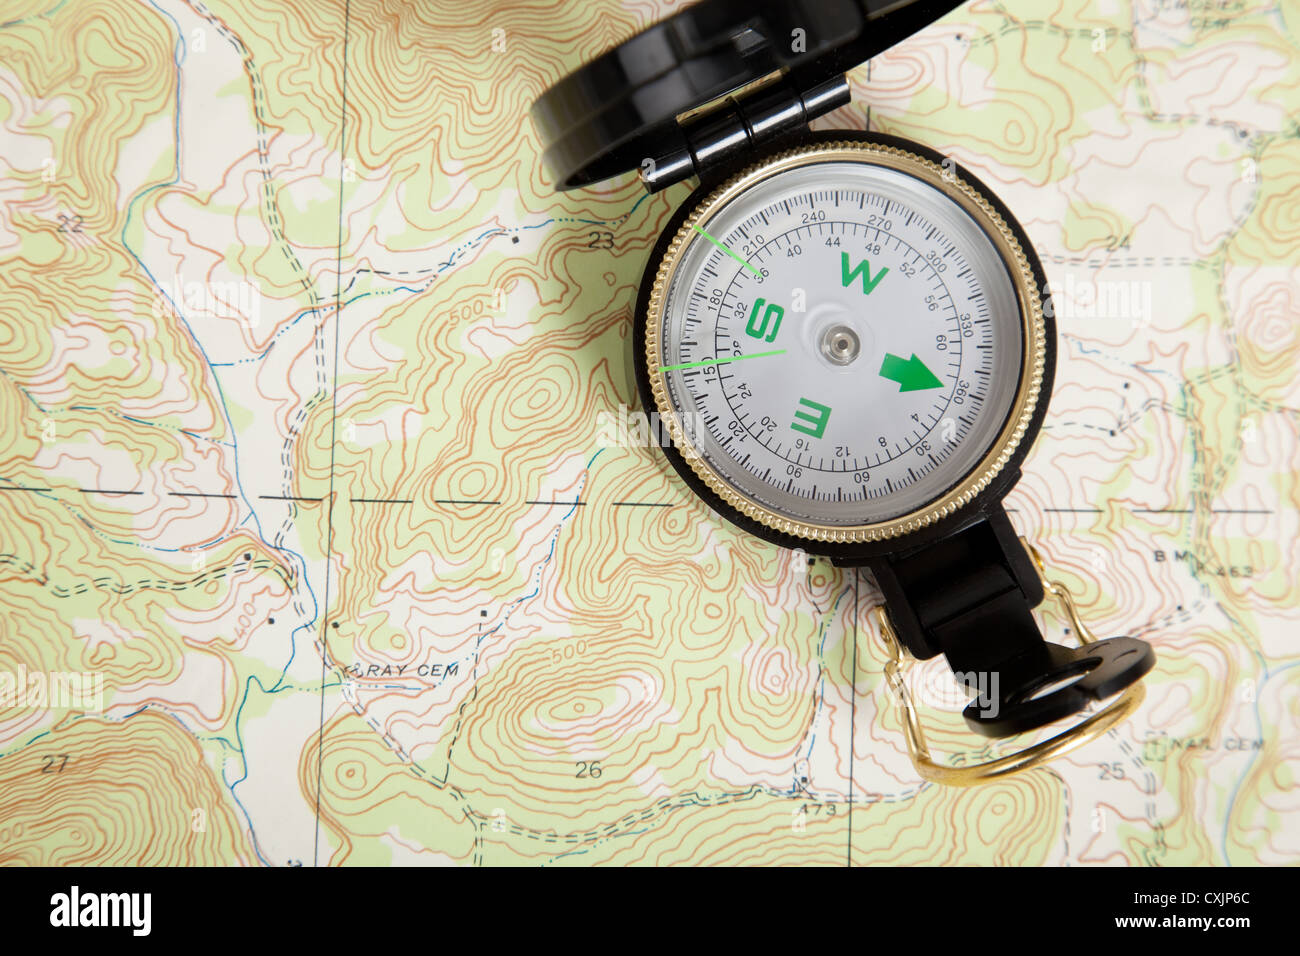 Topographical map and compass Stock Photo